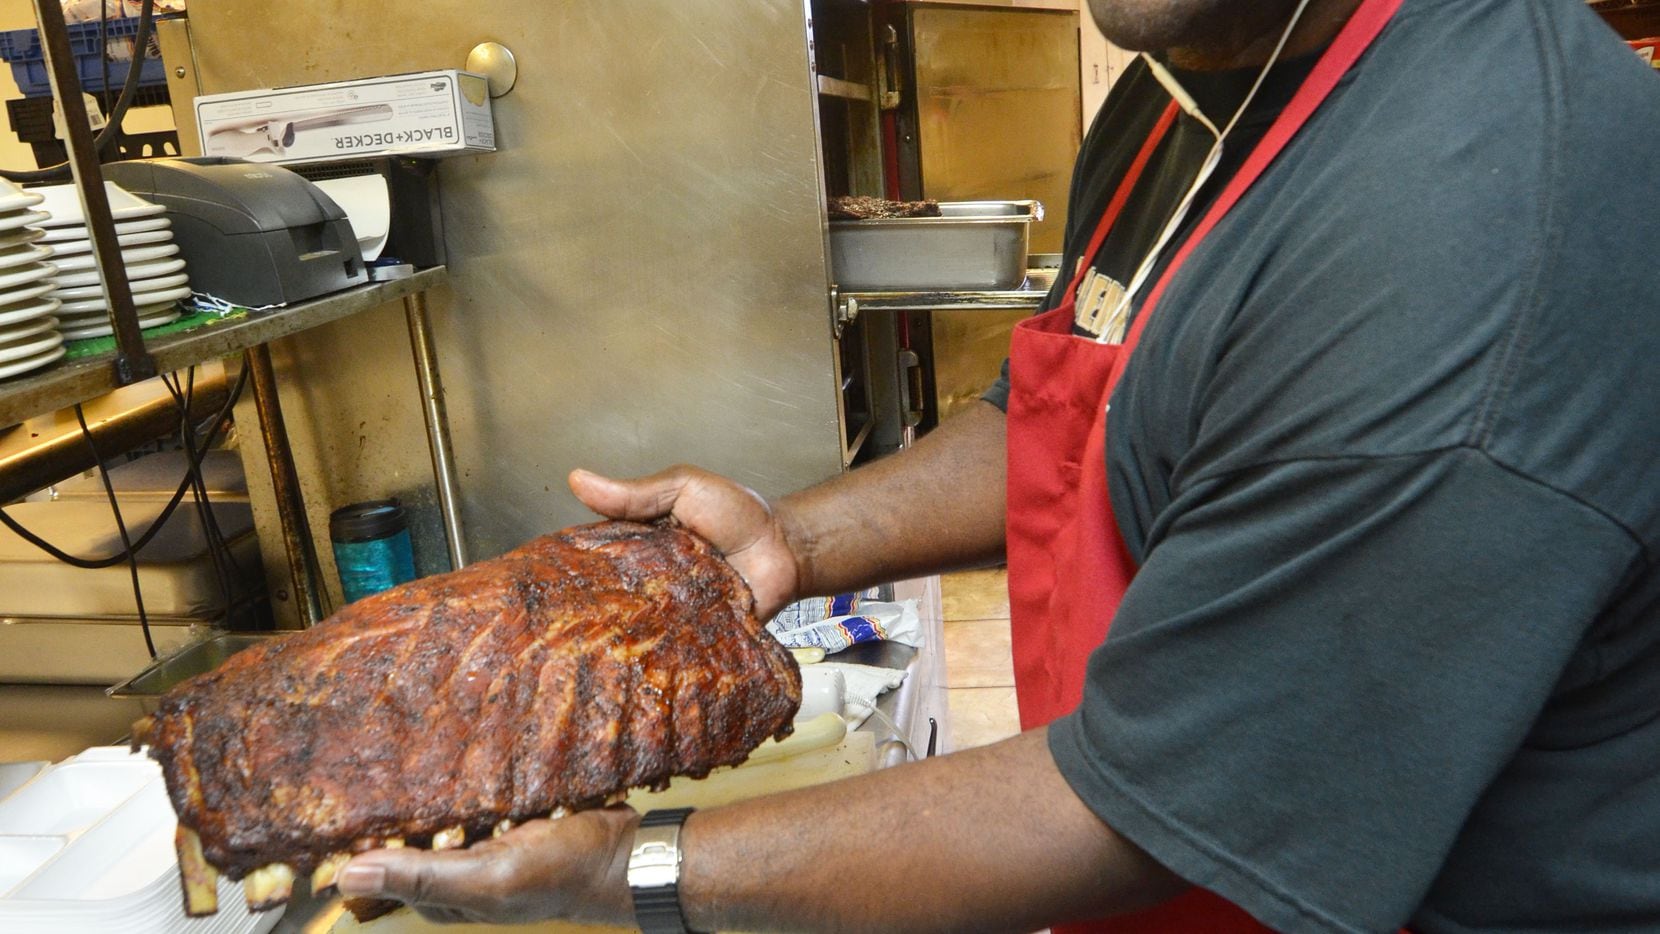 Leon s relative Buster Sidney shows a rack of ribs just extracted from the smoker.  Leon s...